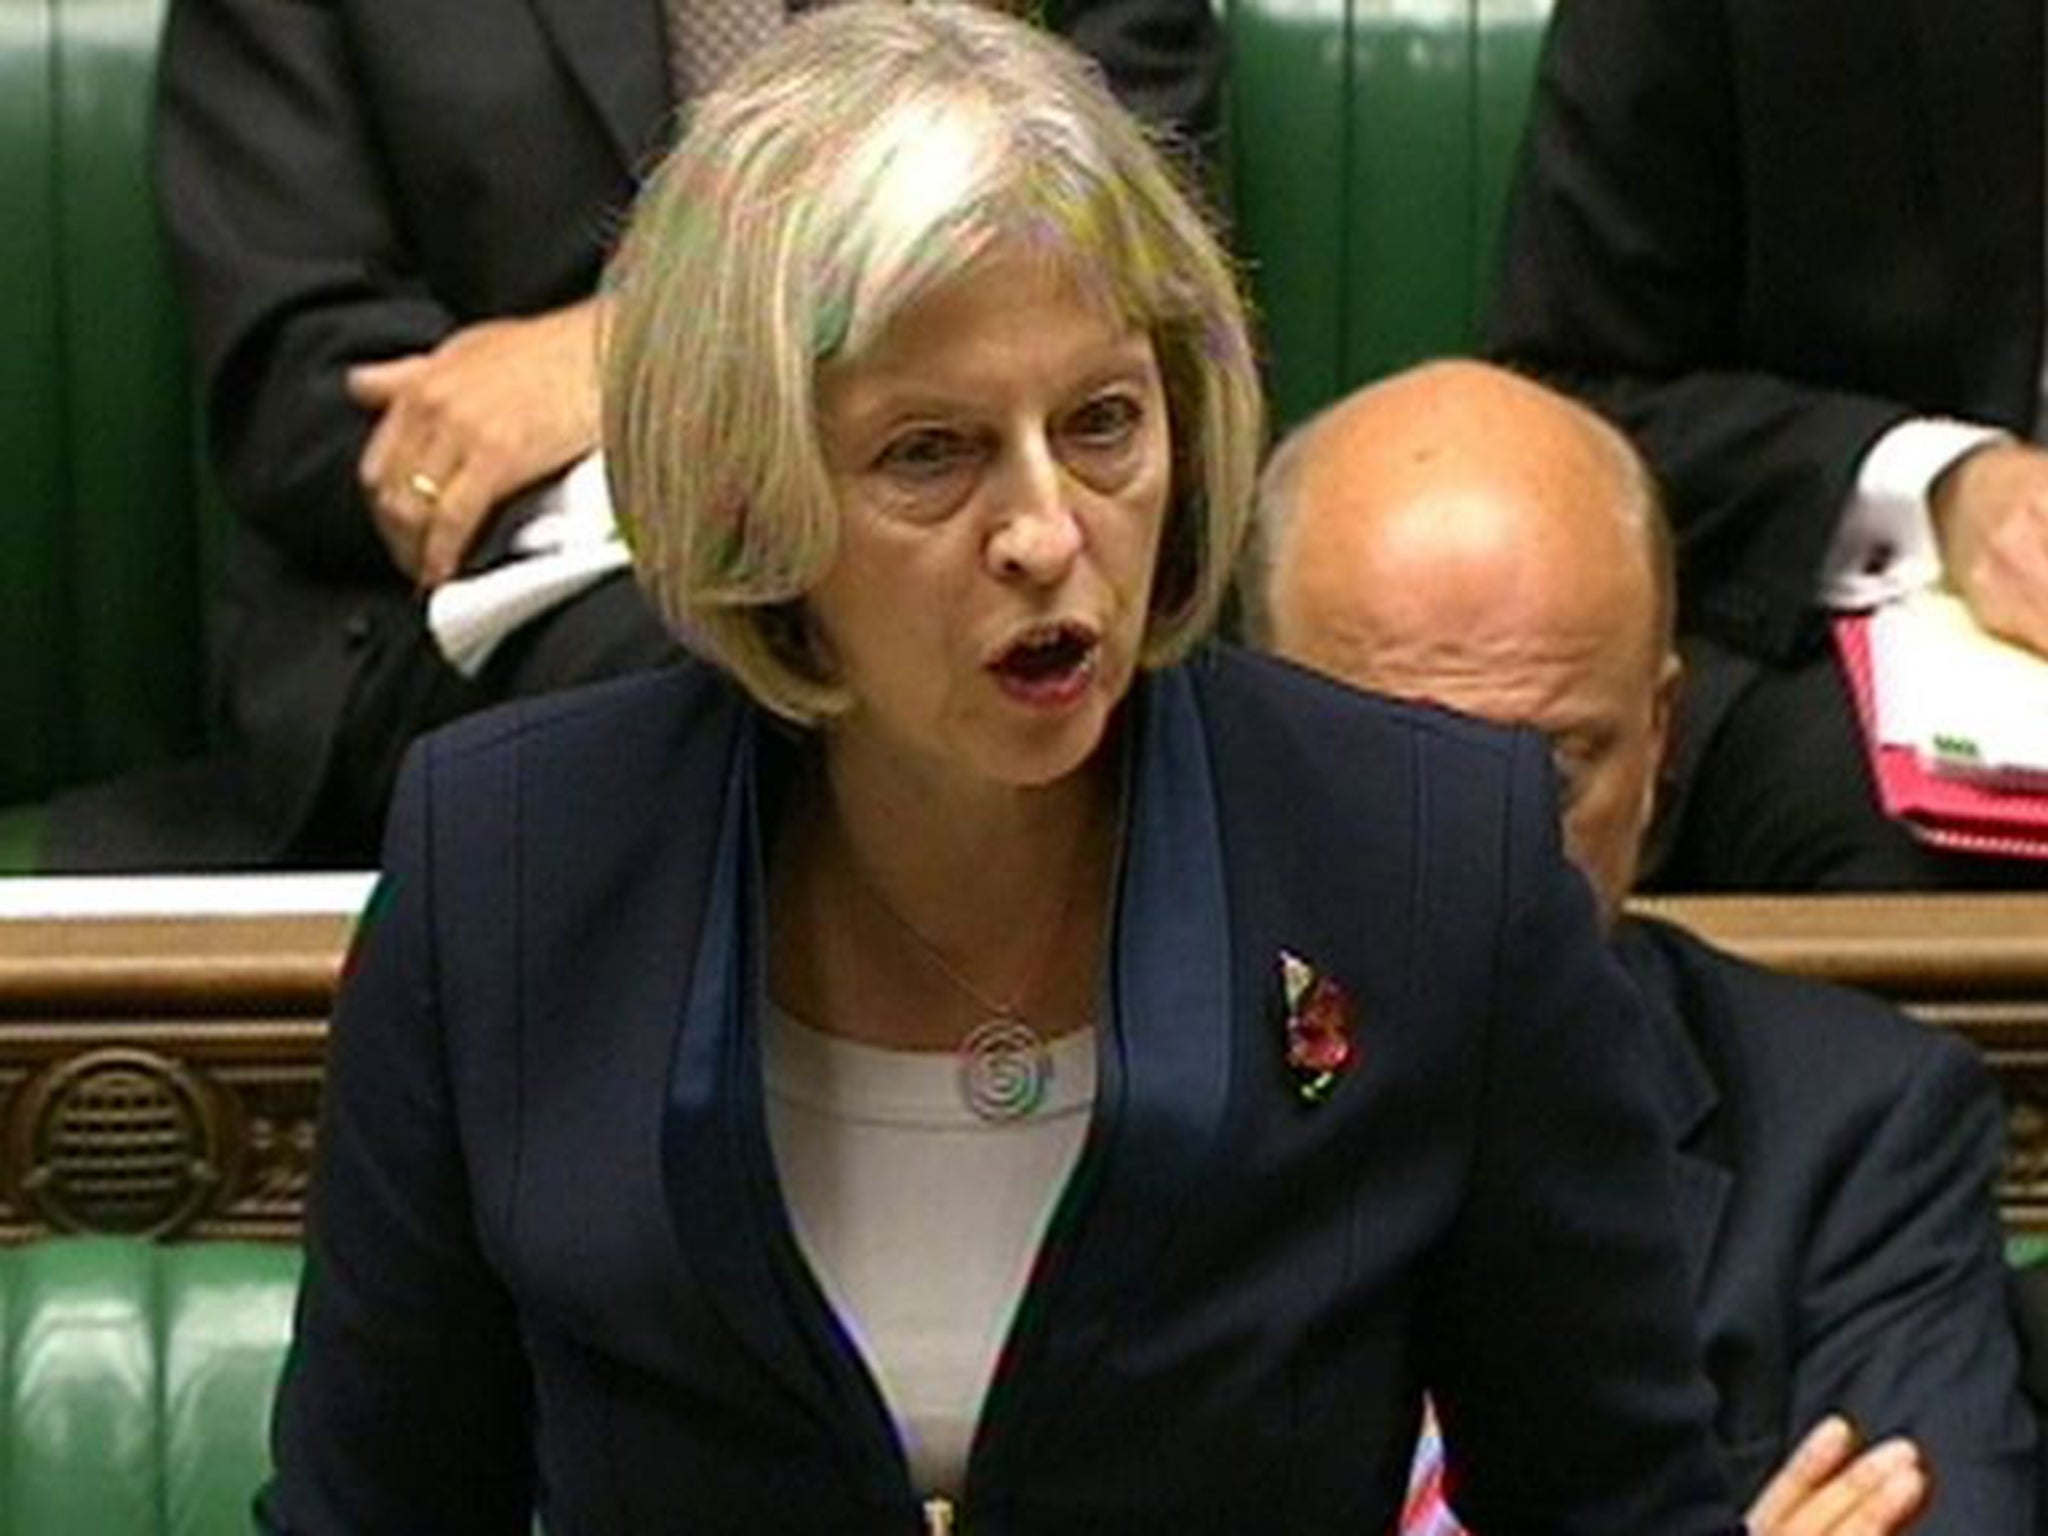 The Home Secretary Theresa May is steering the Bill through Parliament